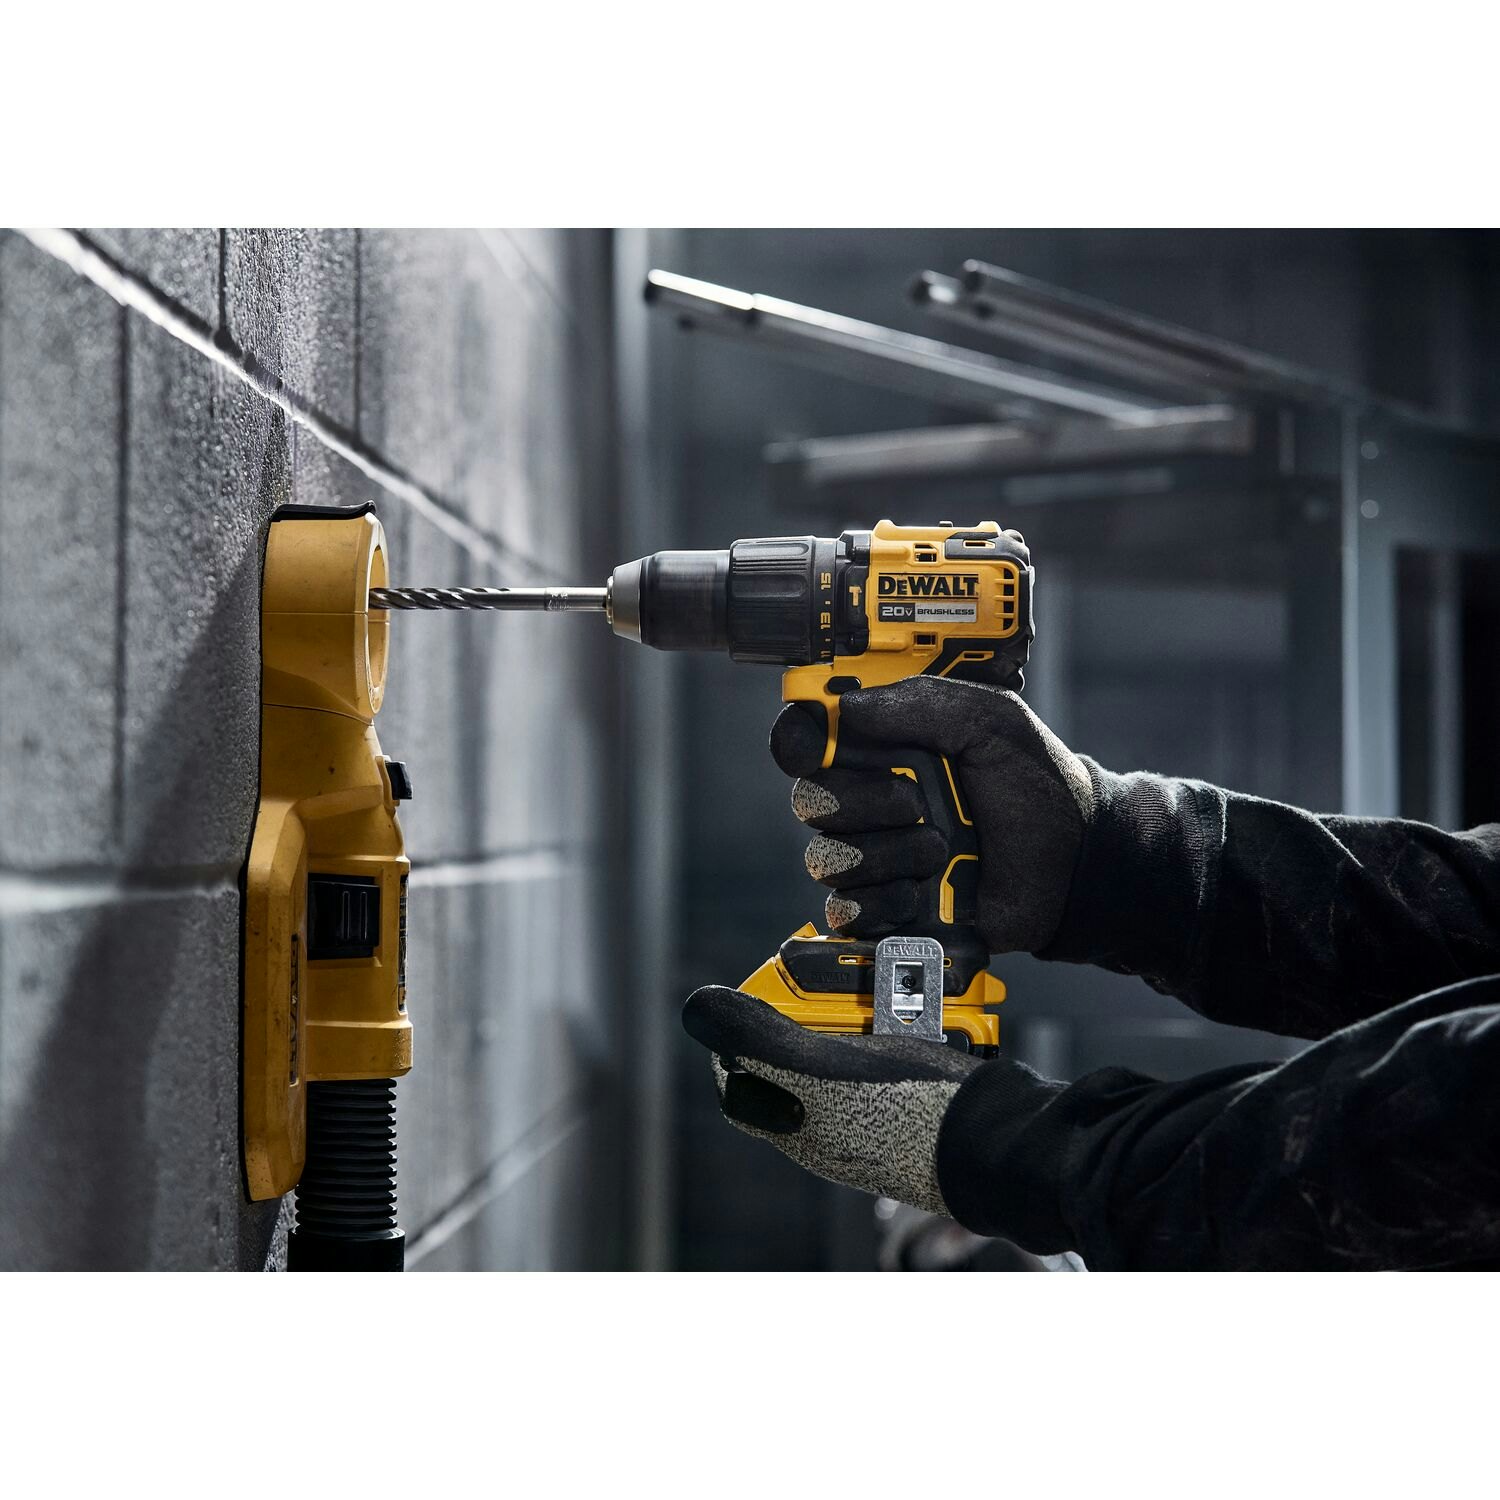 Launches 20V MAX 1/2-in. Drill Driver and Hammer Drill From: DEWALT | For Construction